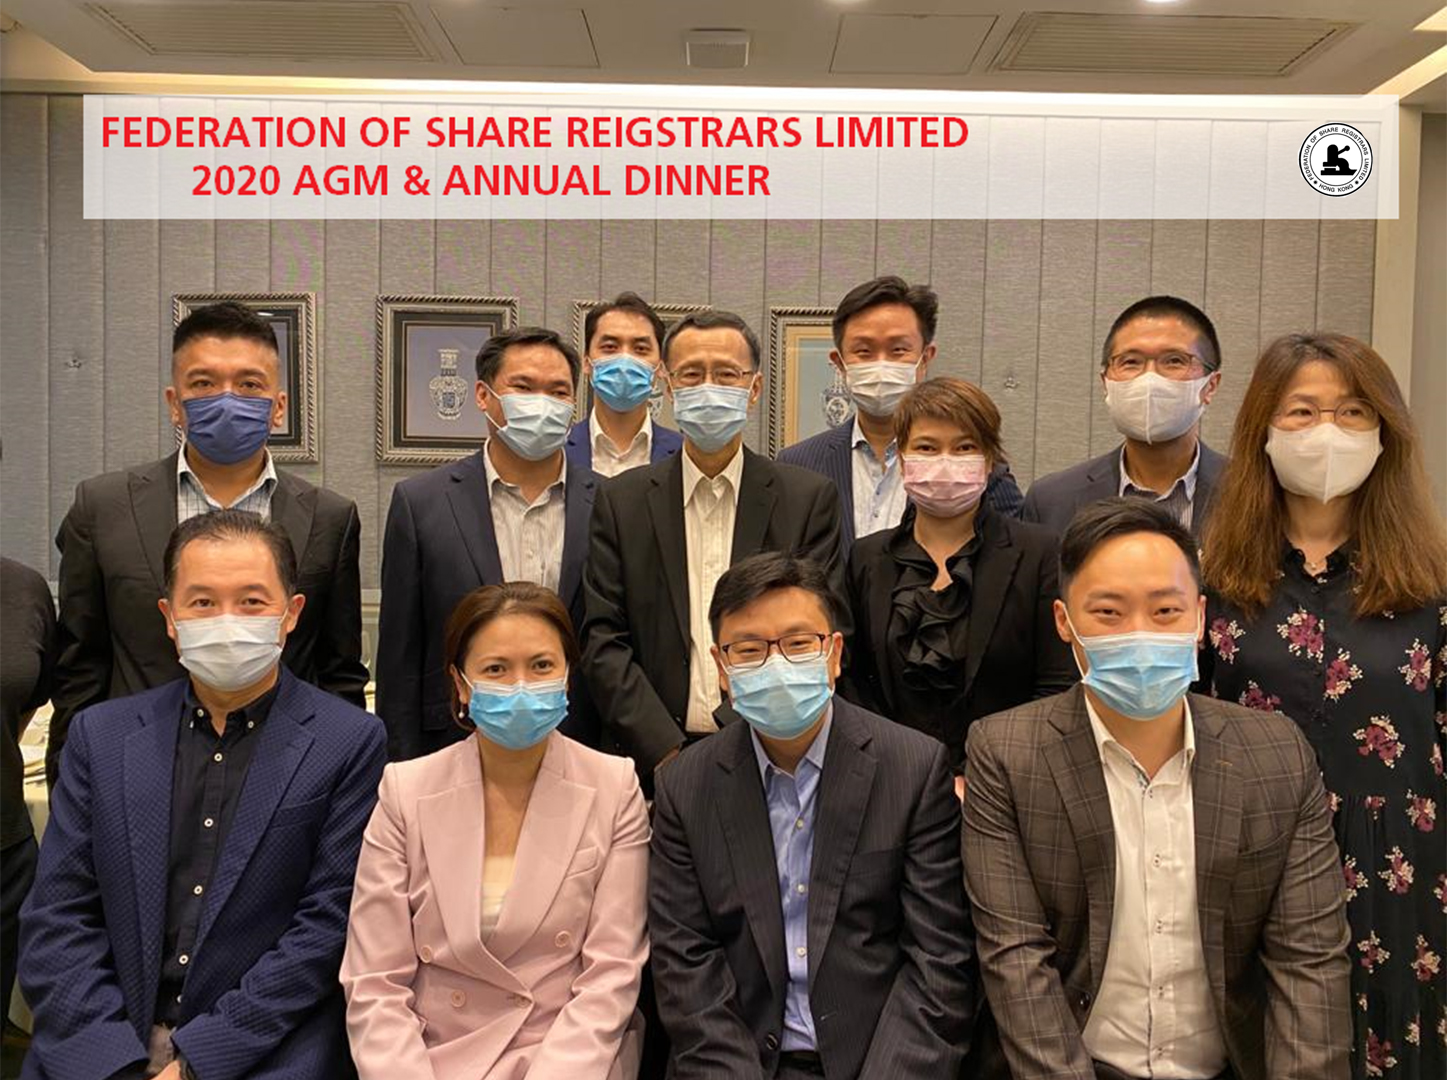 Catherine Wong appointed Chairman of Federation of Share Registrars